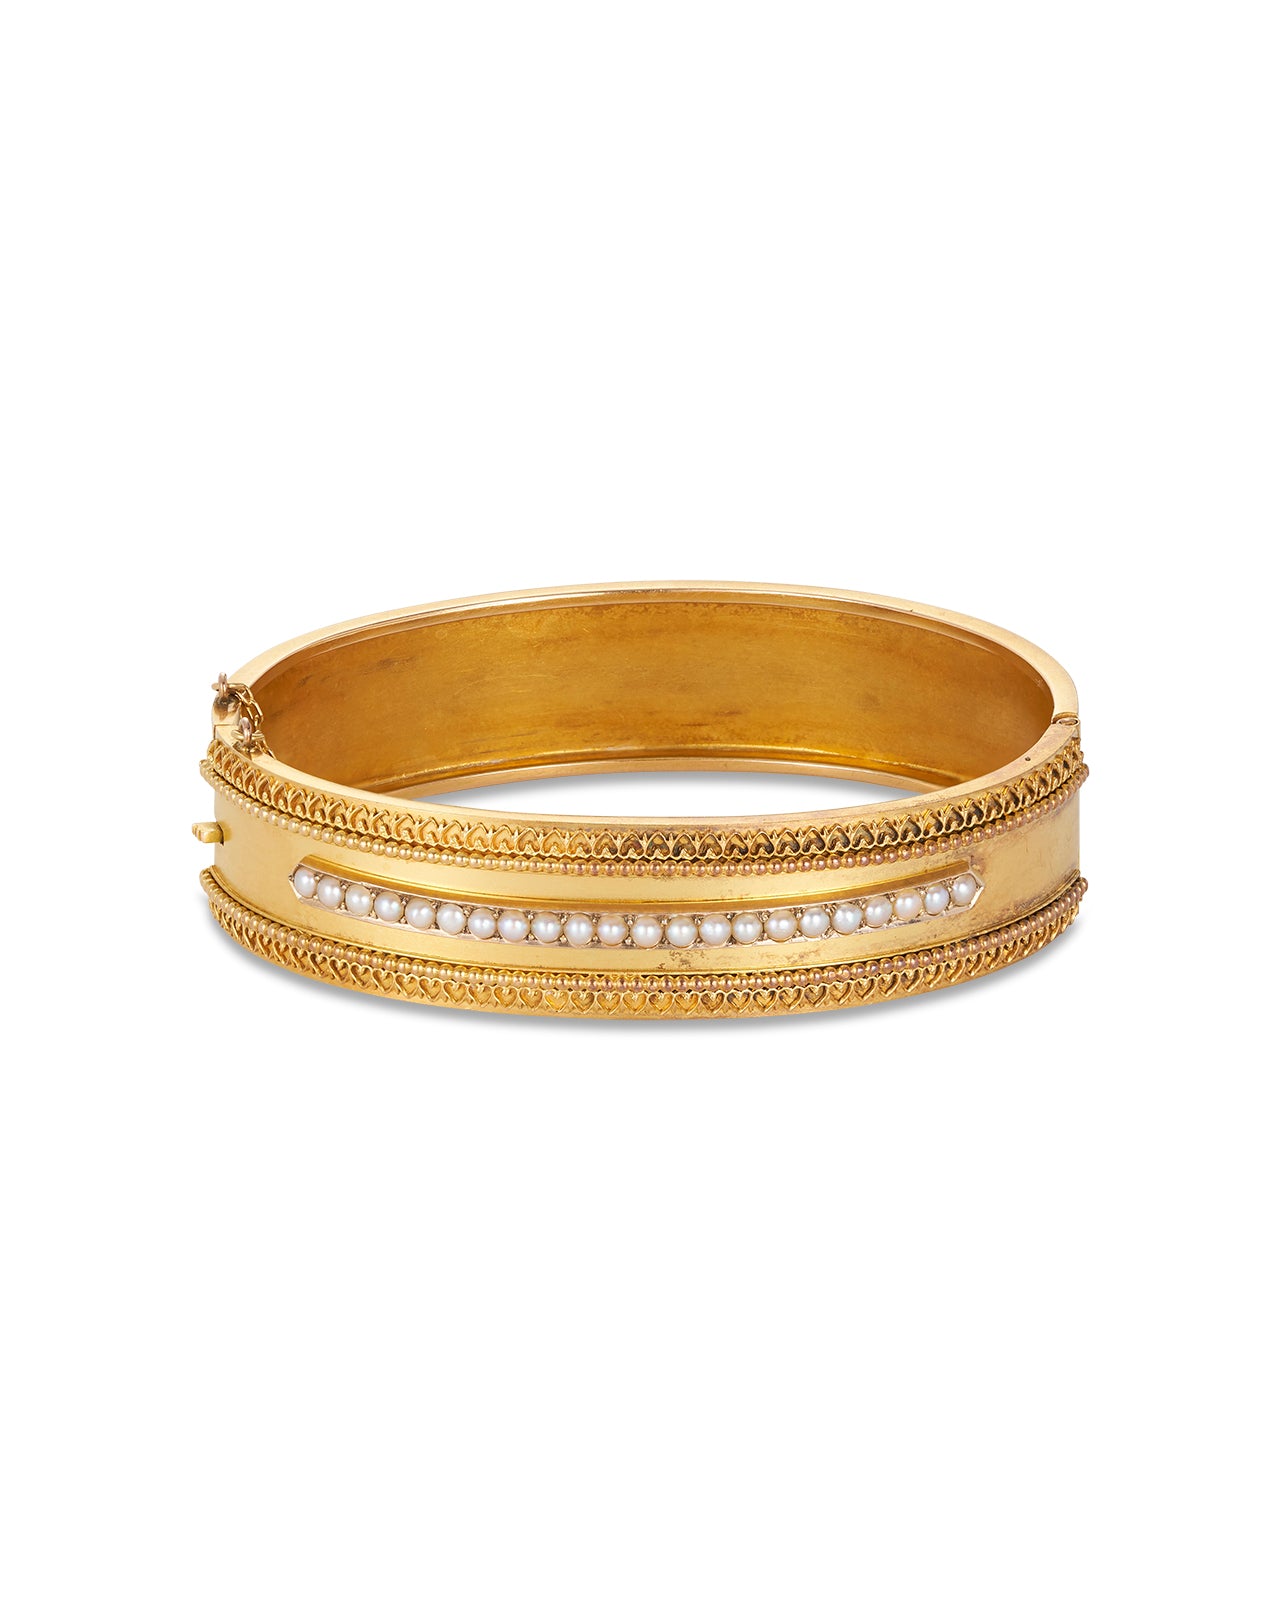 Victorian Gold & Seed Pearl Bangle, c 1880